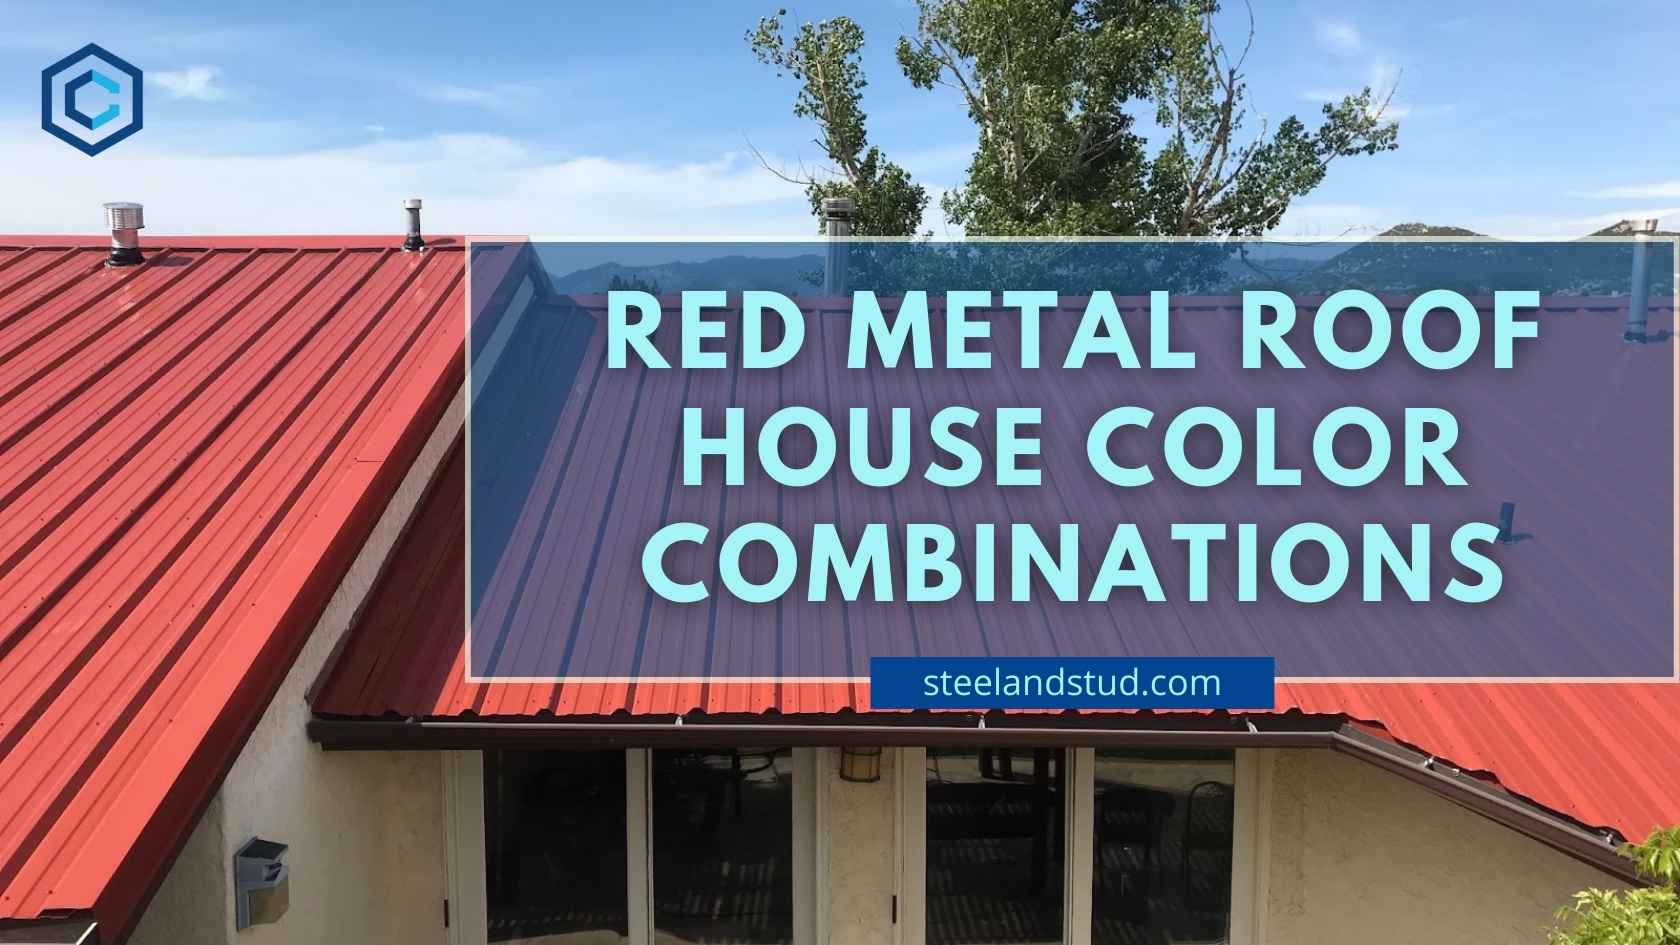 Red Metal Roof House Color Combinations